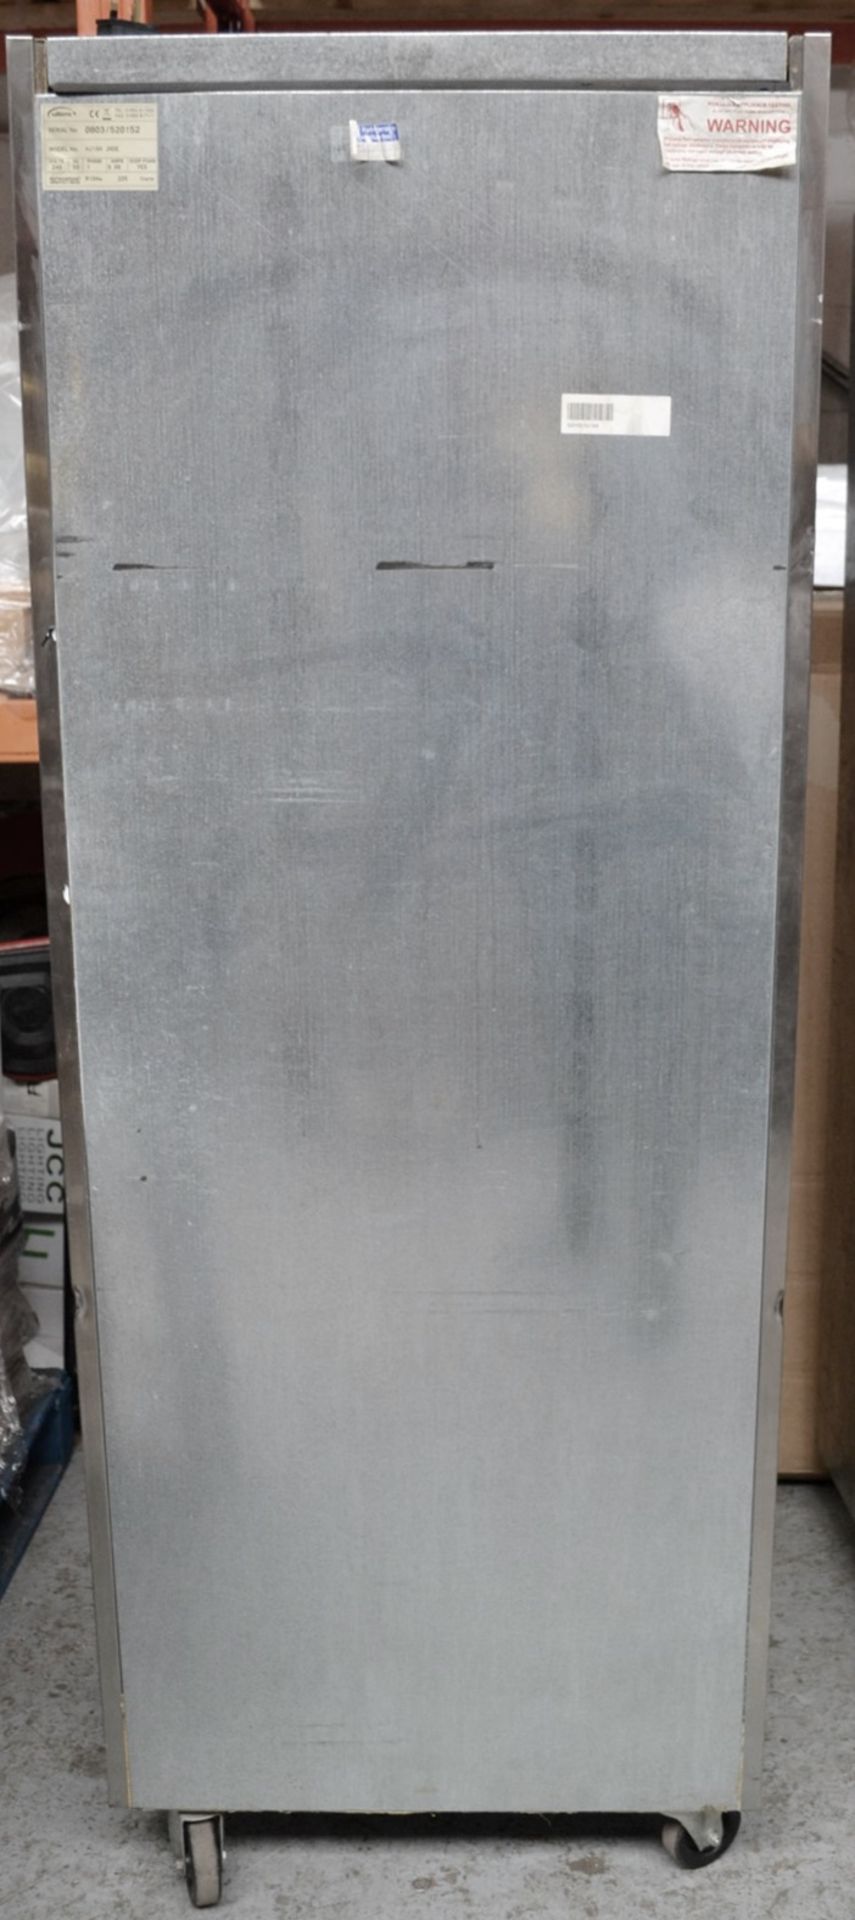 1 x Williams Jade 1-Door 620Ltr Commercial Cabinet Fridge (HJ1SA JADE) - Tall Upright Stainless - Image 10 of 14